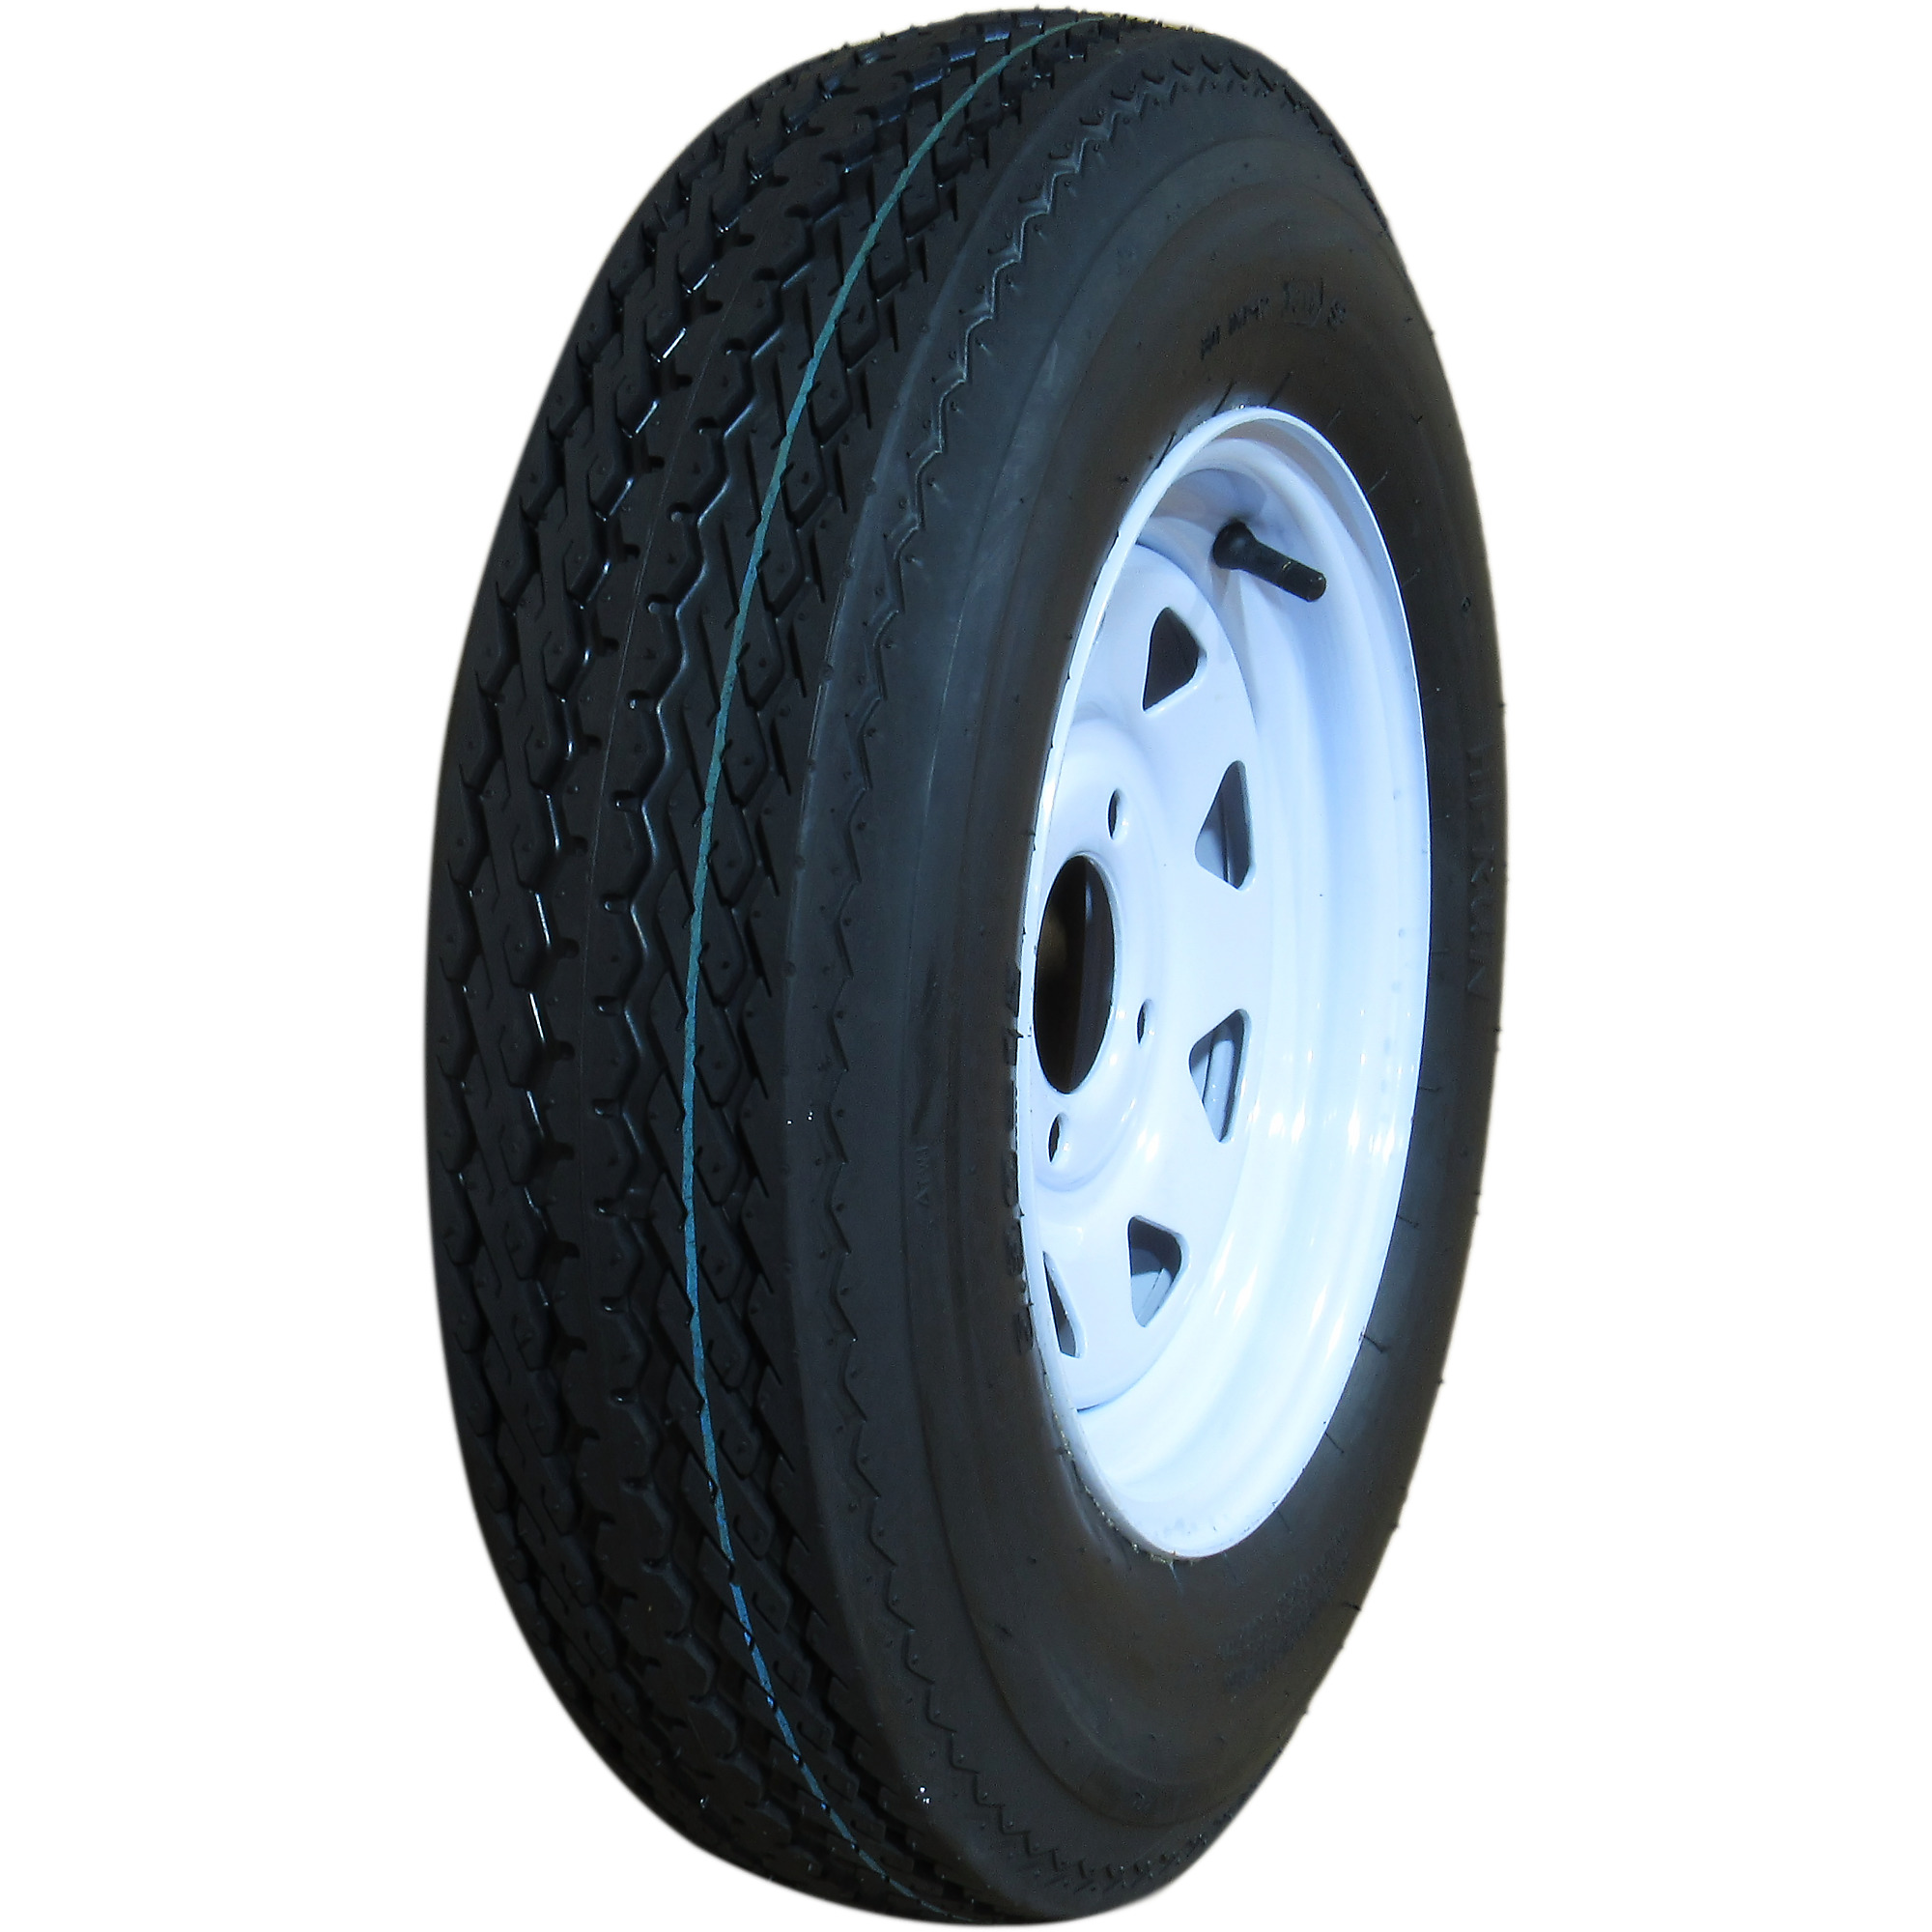 HI-RUN, Highway Trailer Tire Assembly, Bias-Ply, Tire Size 5.70-8 Load Range Rating C, Bolt Holes (qty.) 5 Model ASB1024